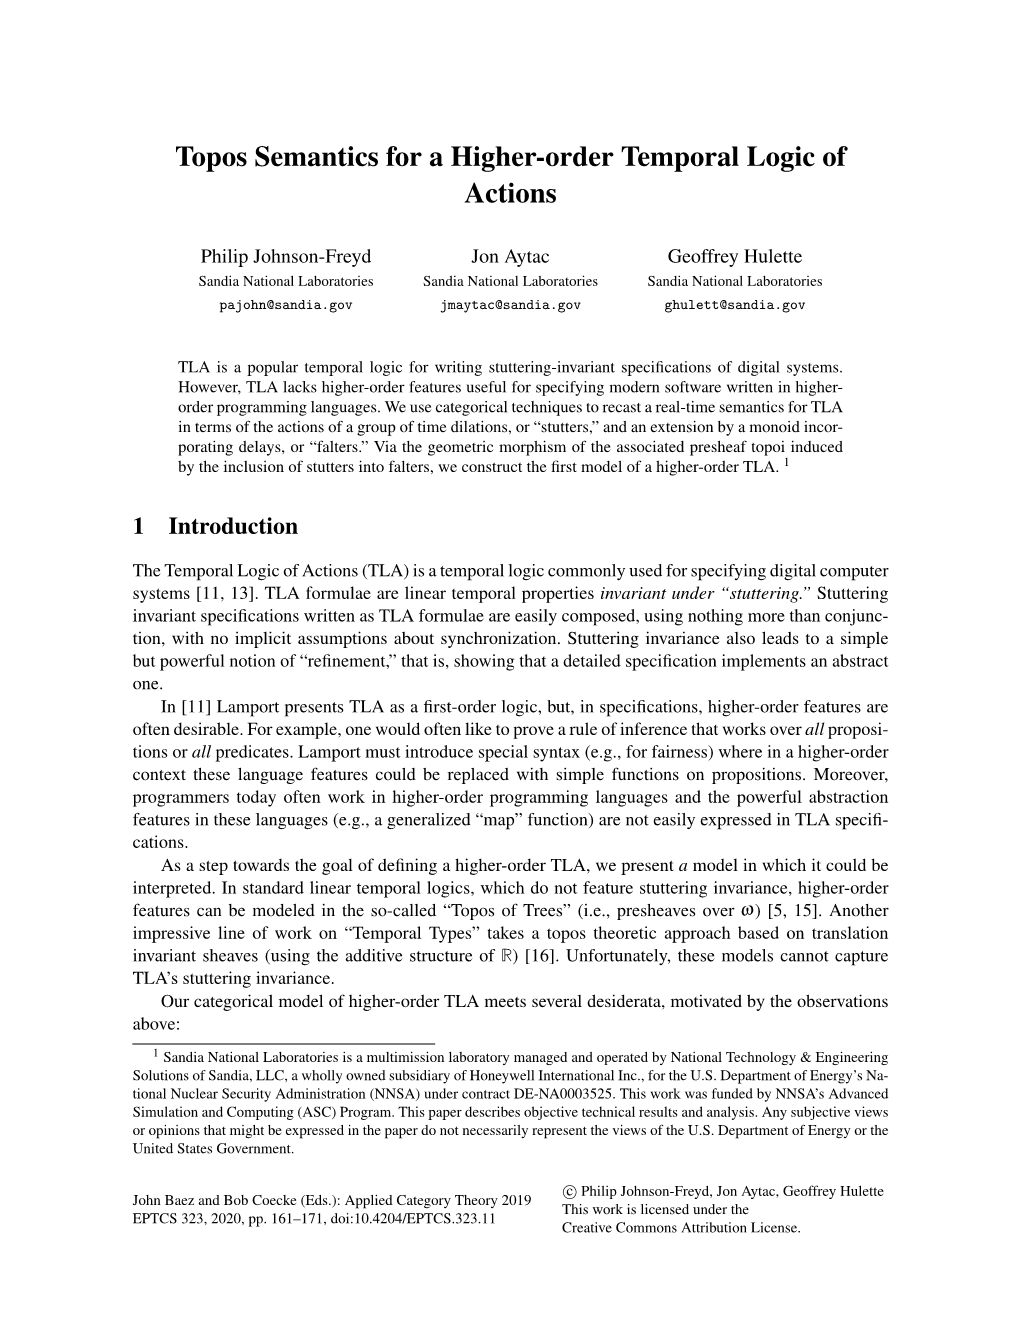 Topos Semantics for a Higher-Order Temporal Logic of Actions